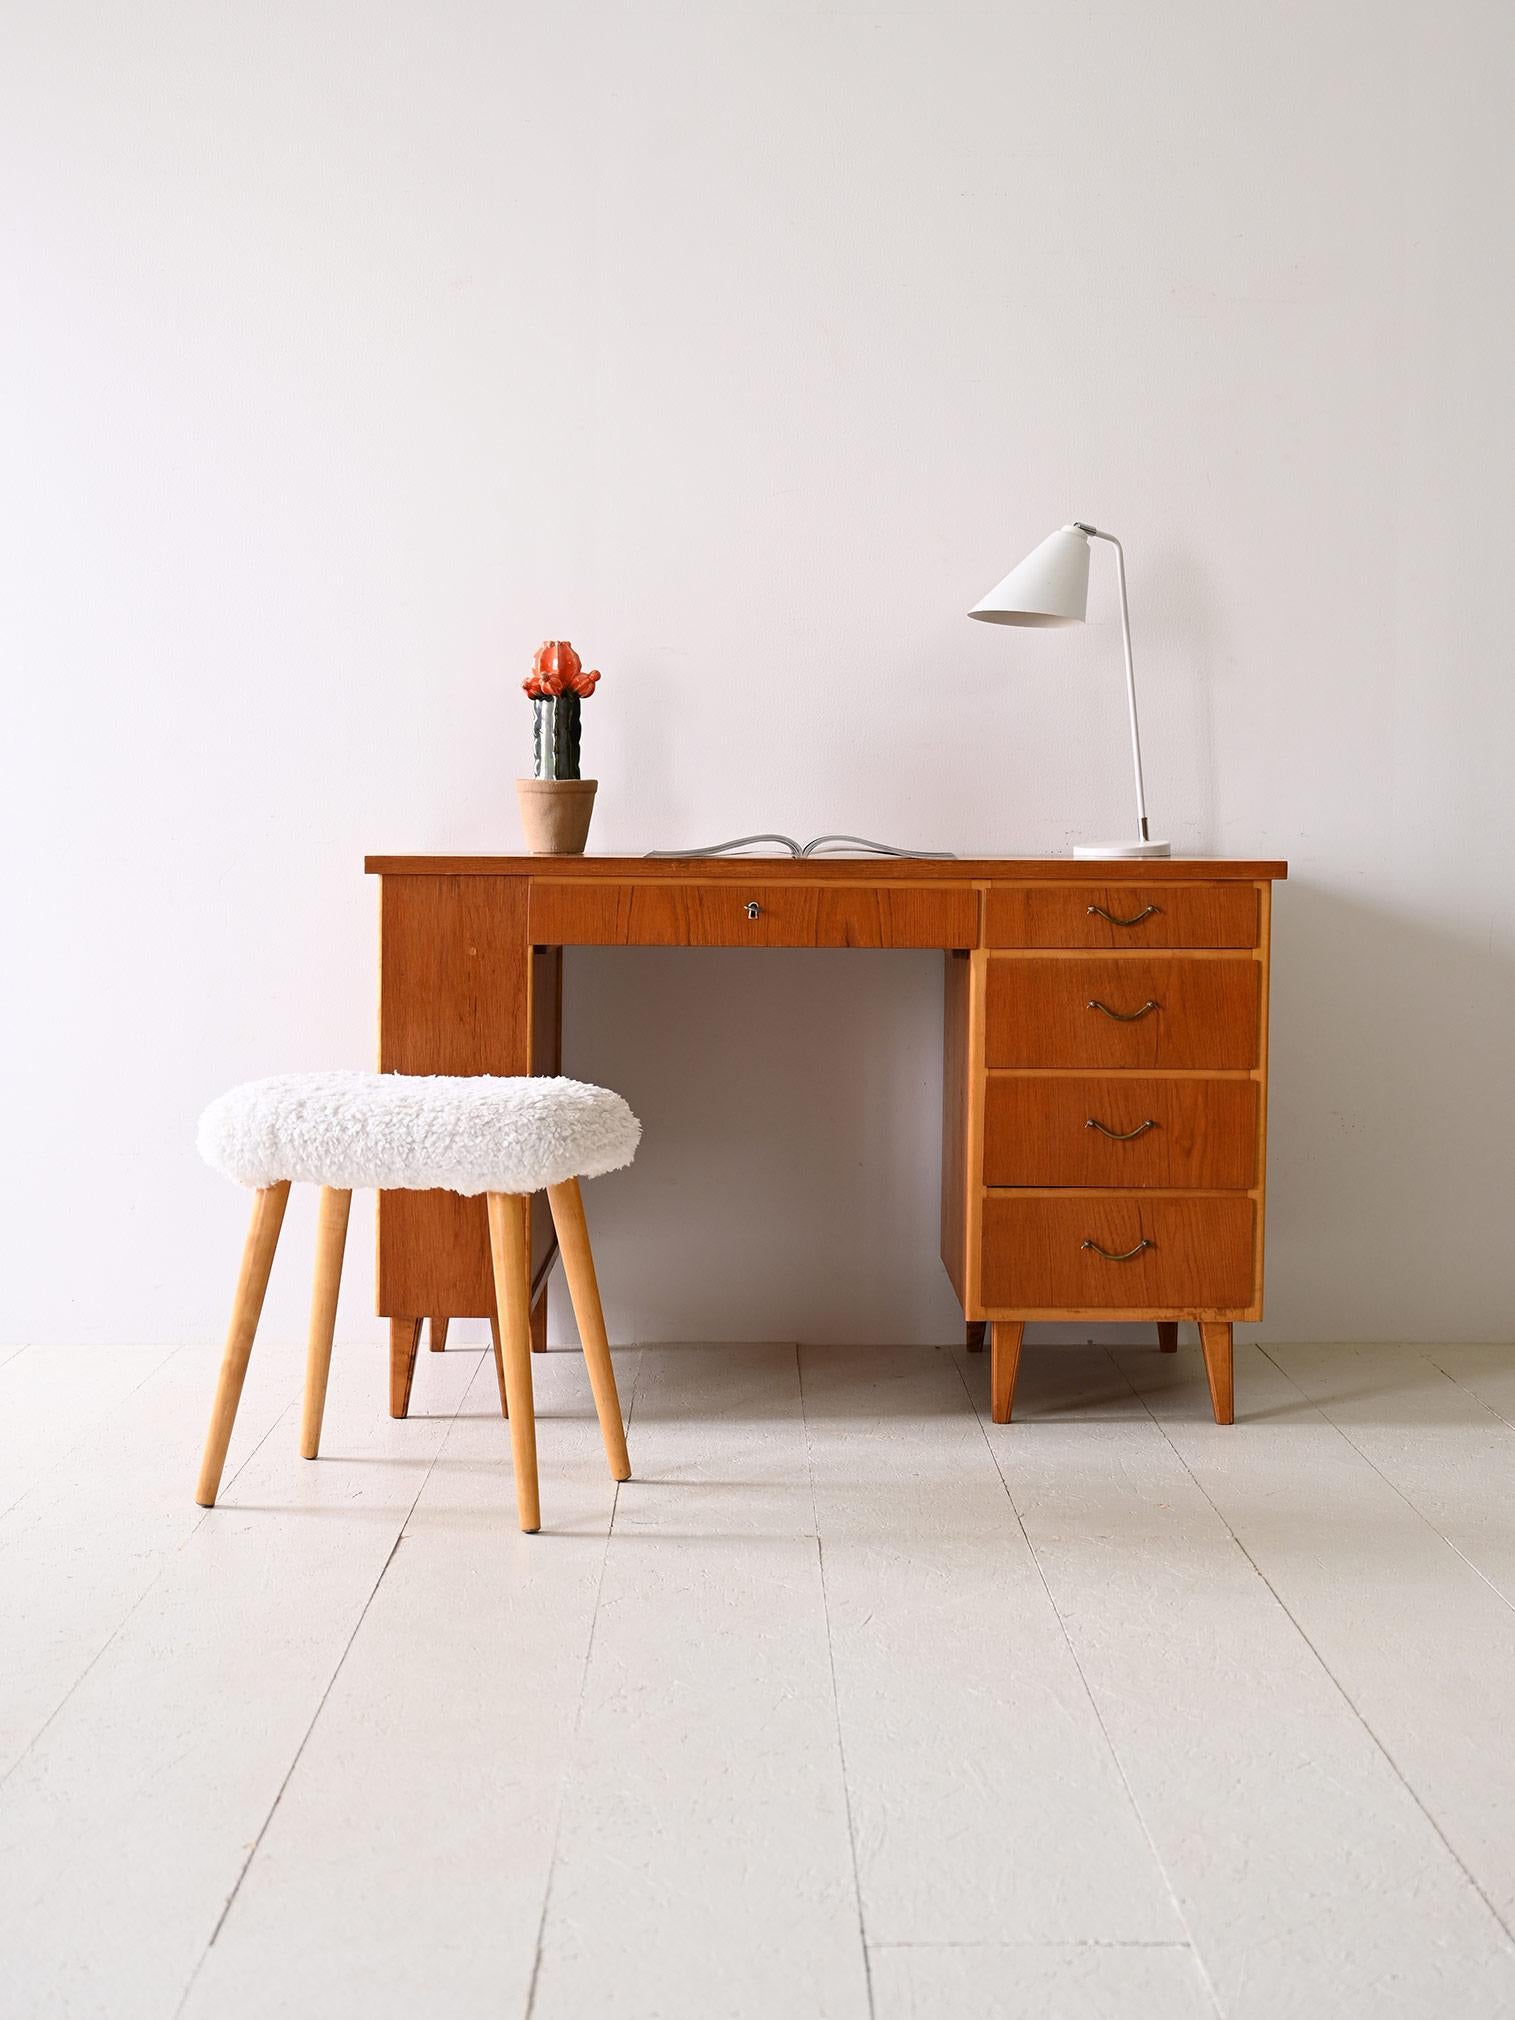 1960s teak desk with drawers and lock.

An efficient desk with square, regular lines, made of teak with a distinctive Nordic style. The four side drawers on the right, with elegant metal handles, provide ample storage space for organizing documents